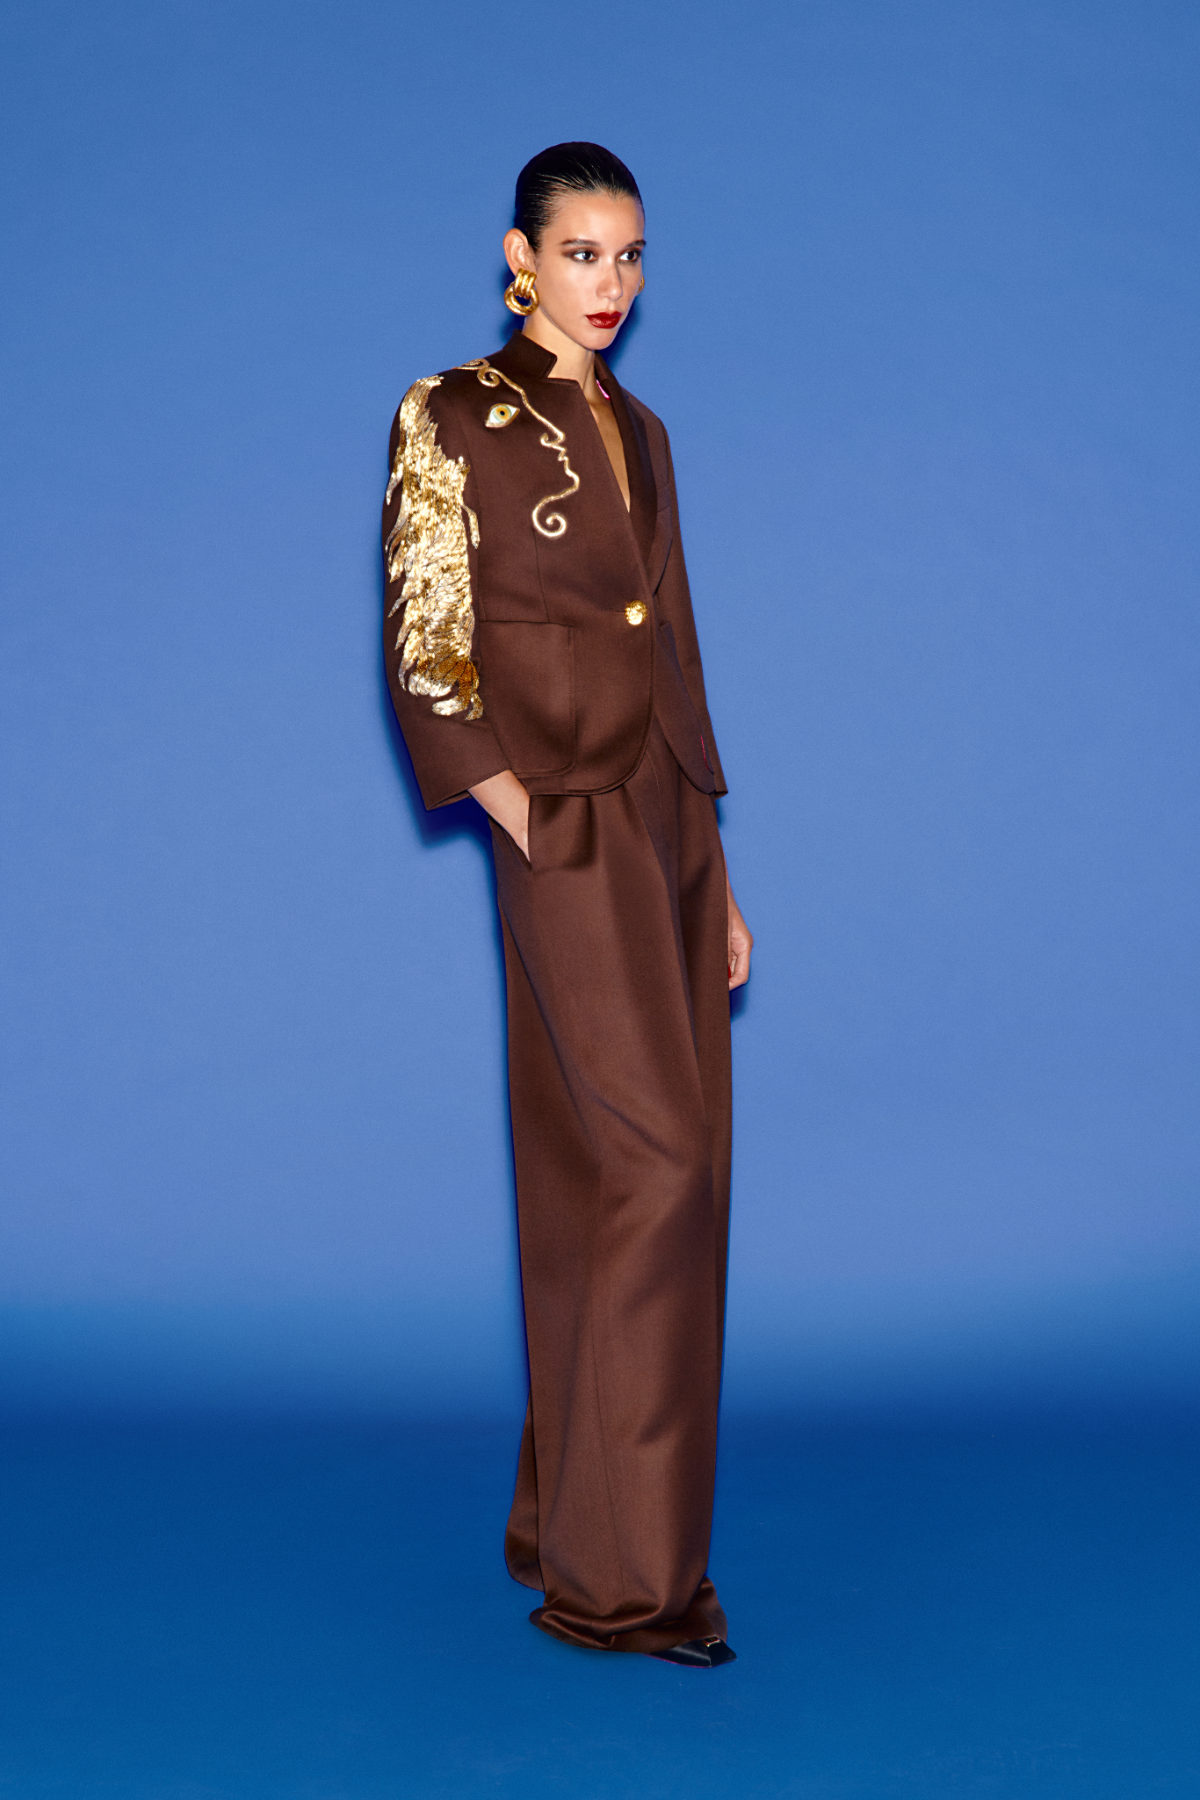 Schiaparelli Presents Its New Prêt-À-Porter Spring-Summer 2023 Collection: The Extra Ordinary